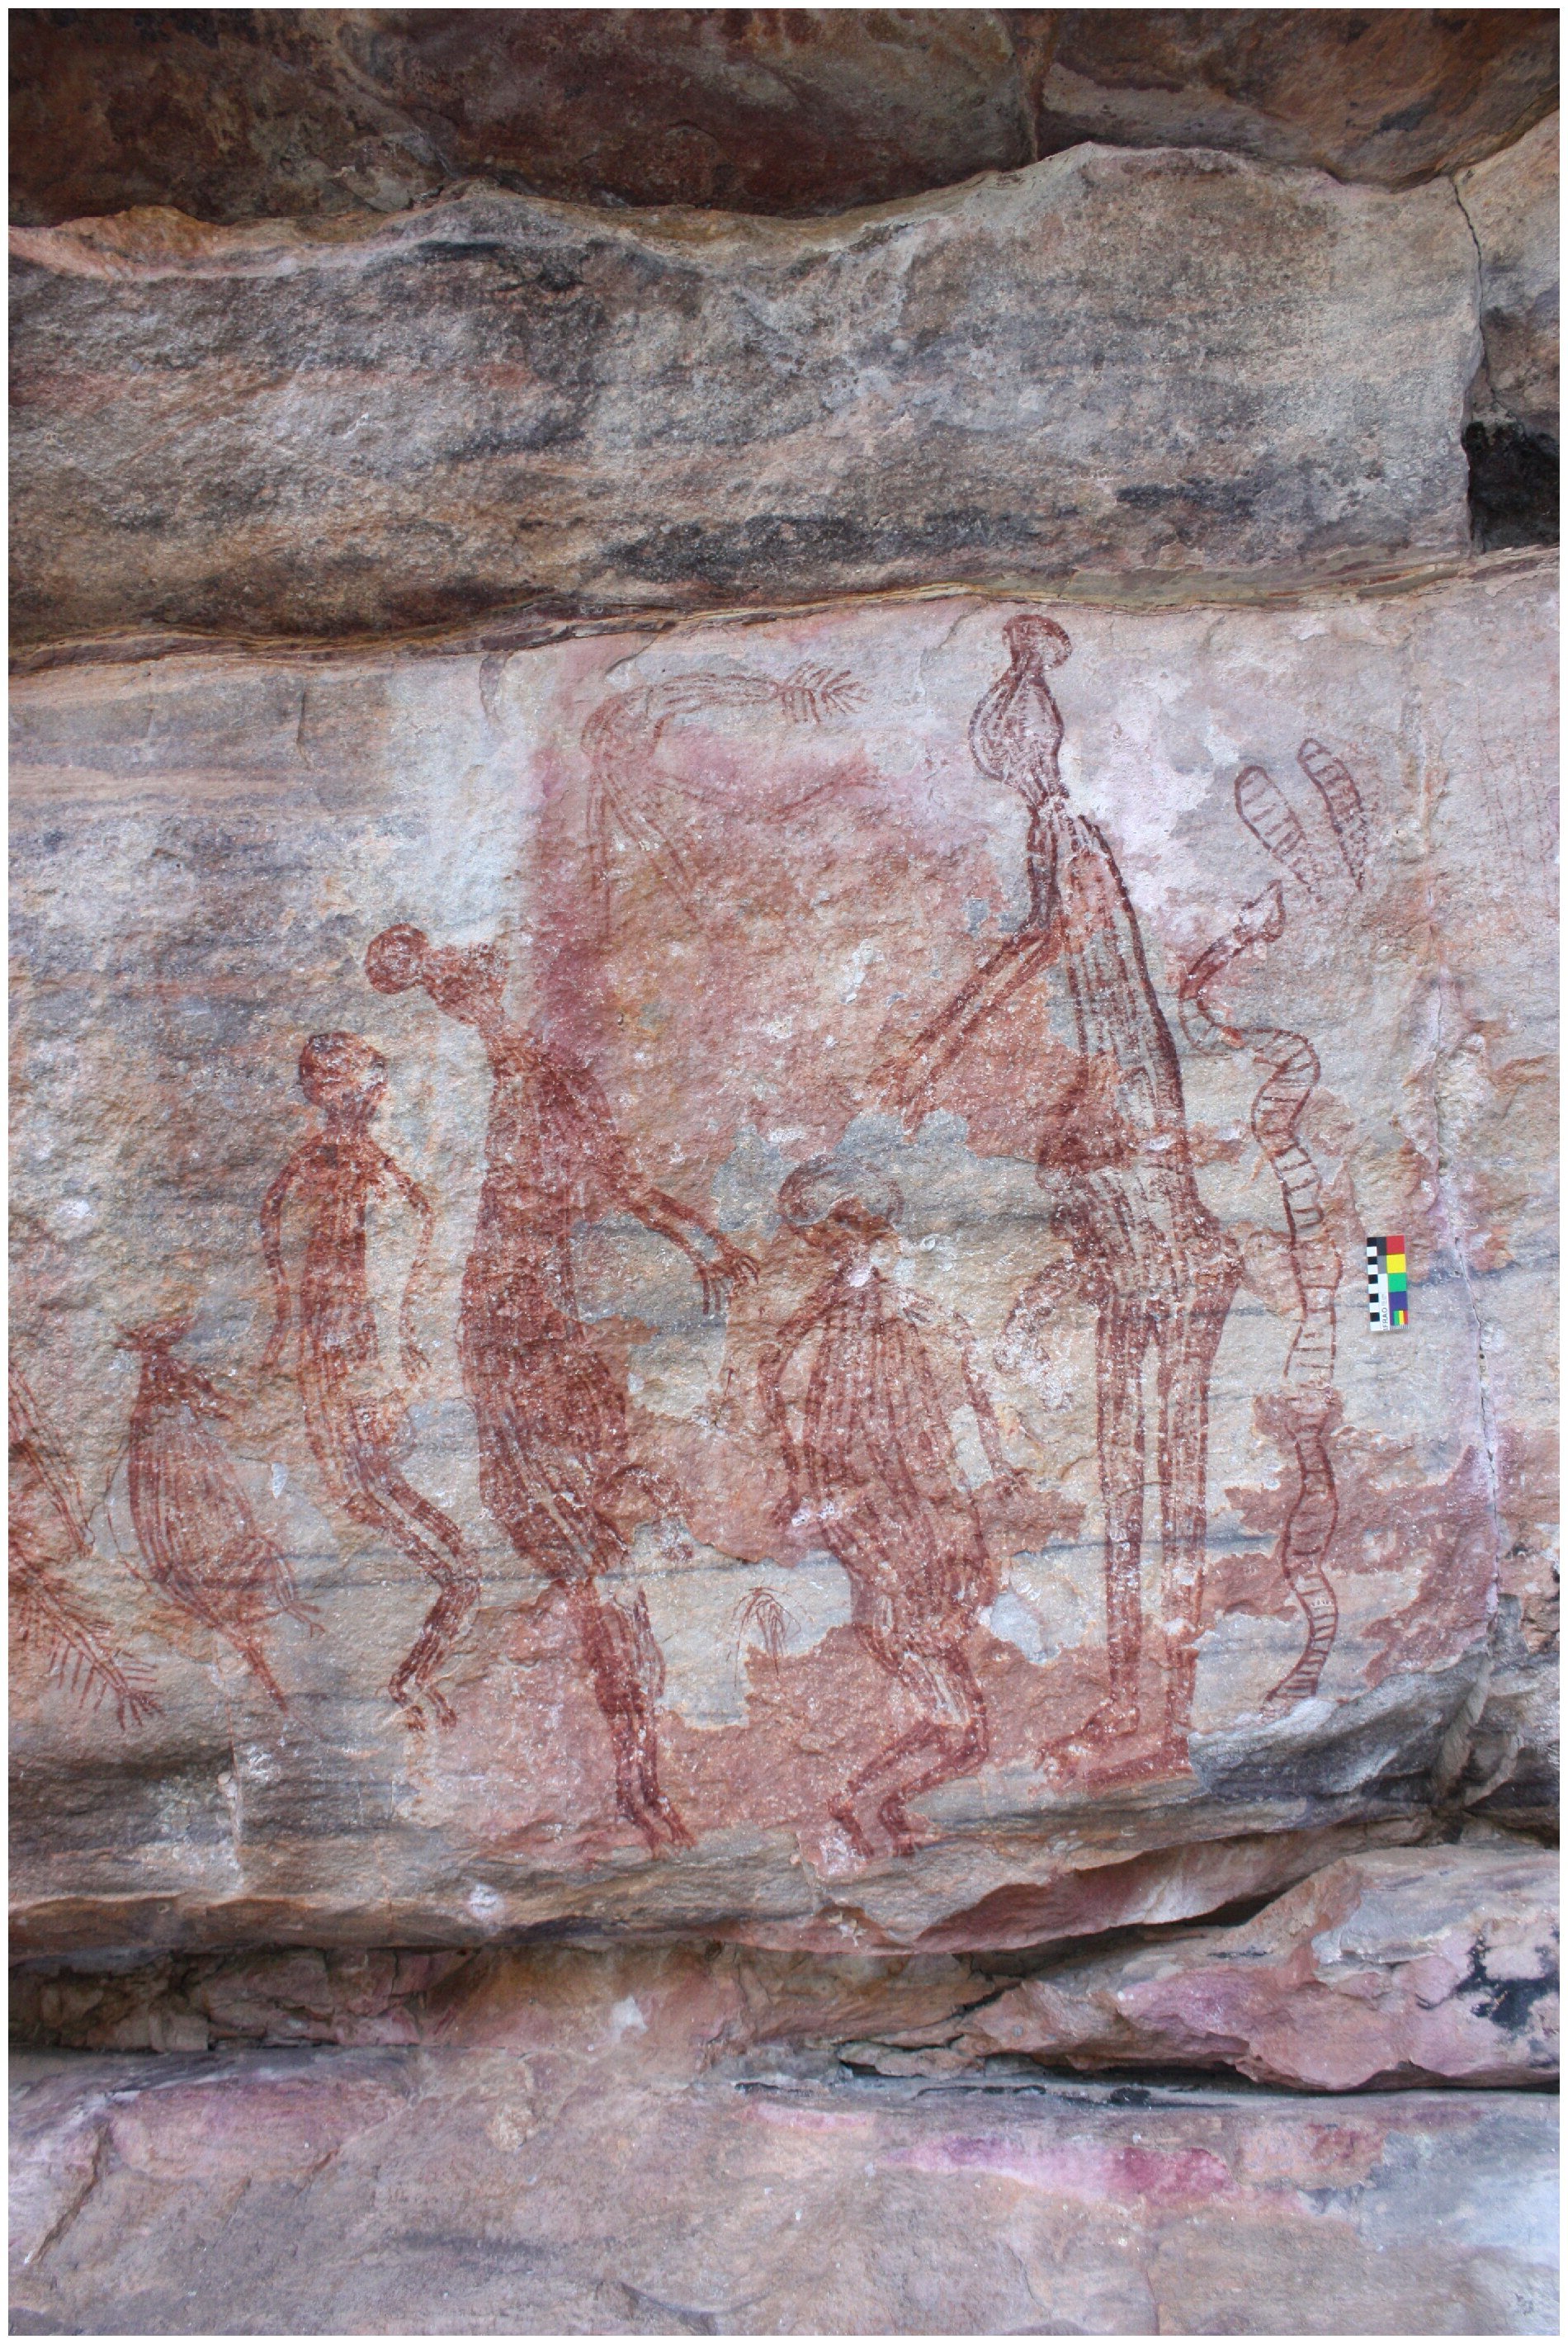 Archaeologists Have Discovered an New Style of Aboriginal Rock That Honors the Human-Animal Bond